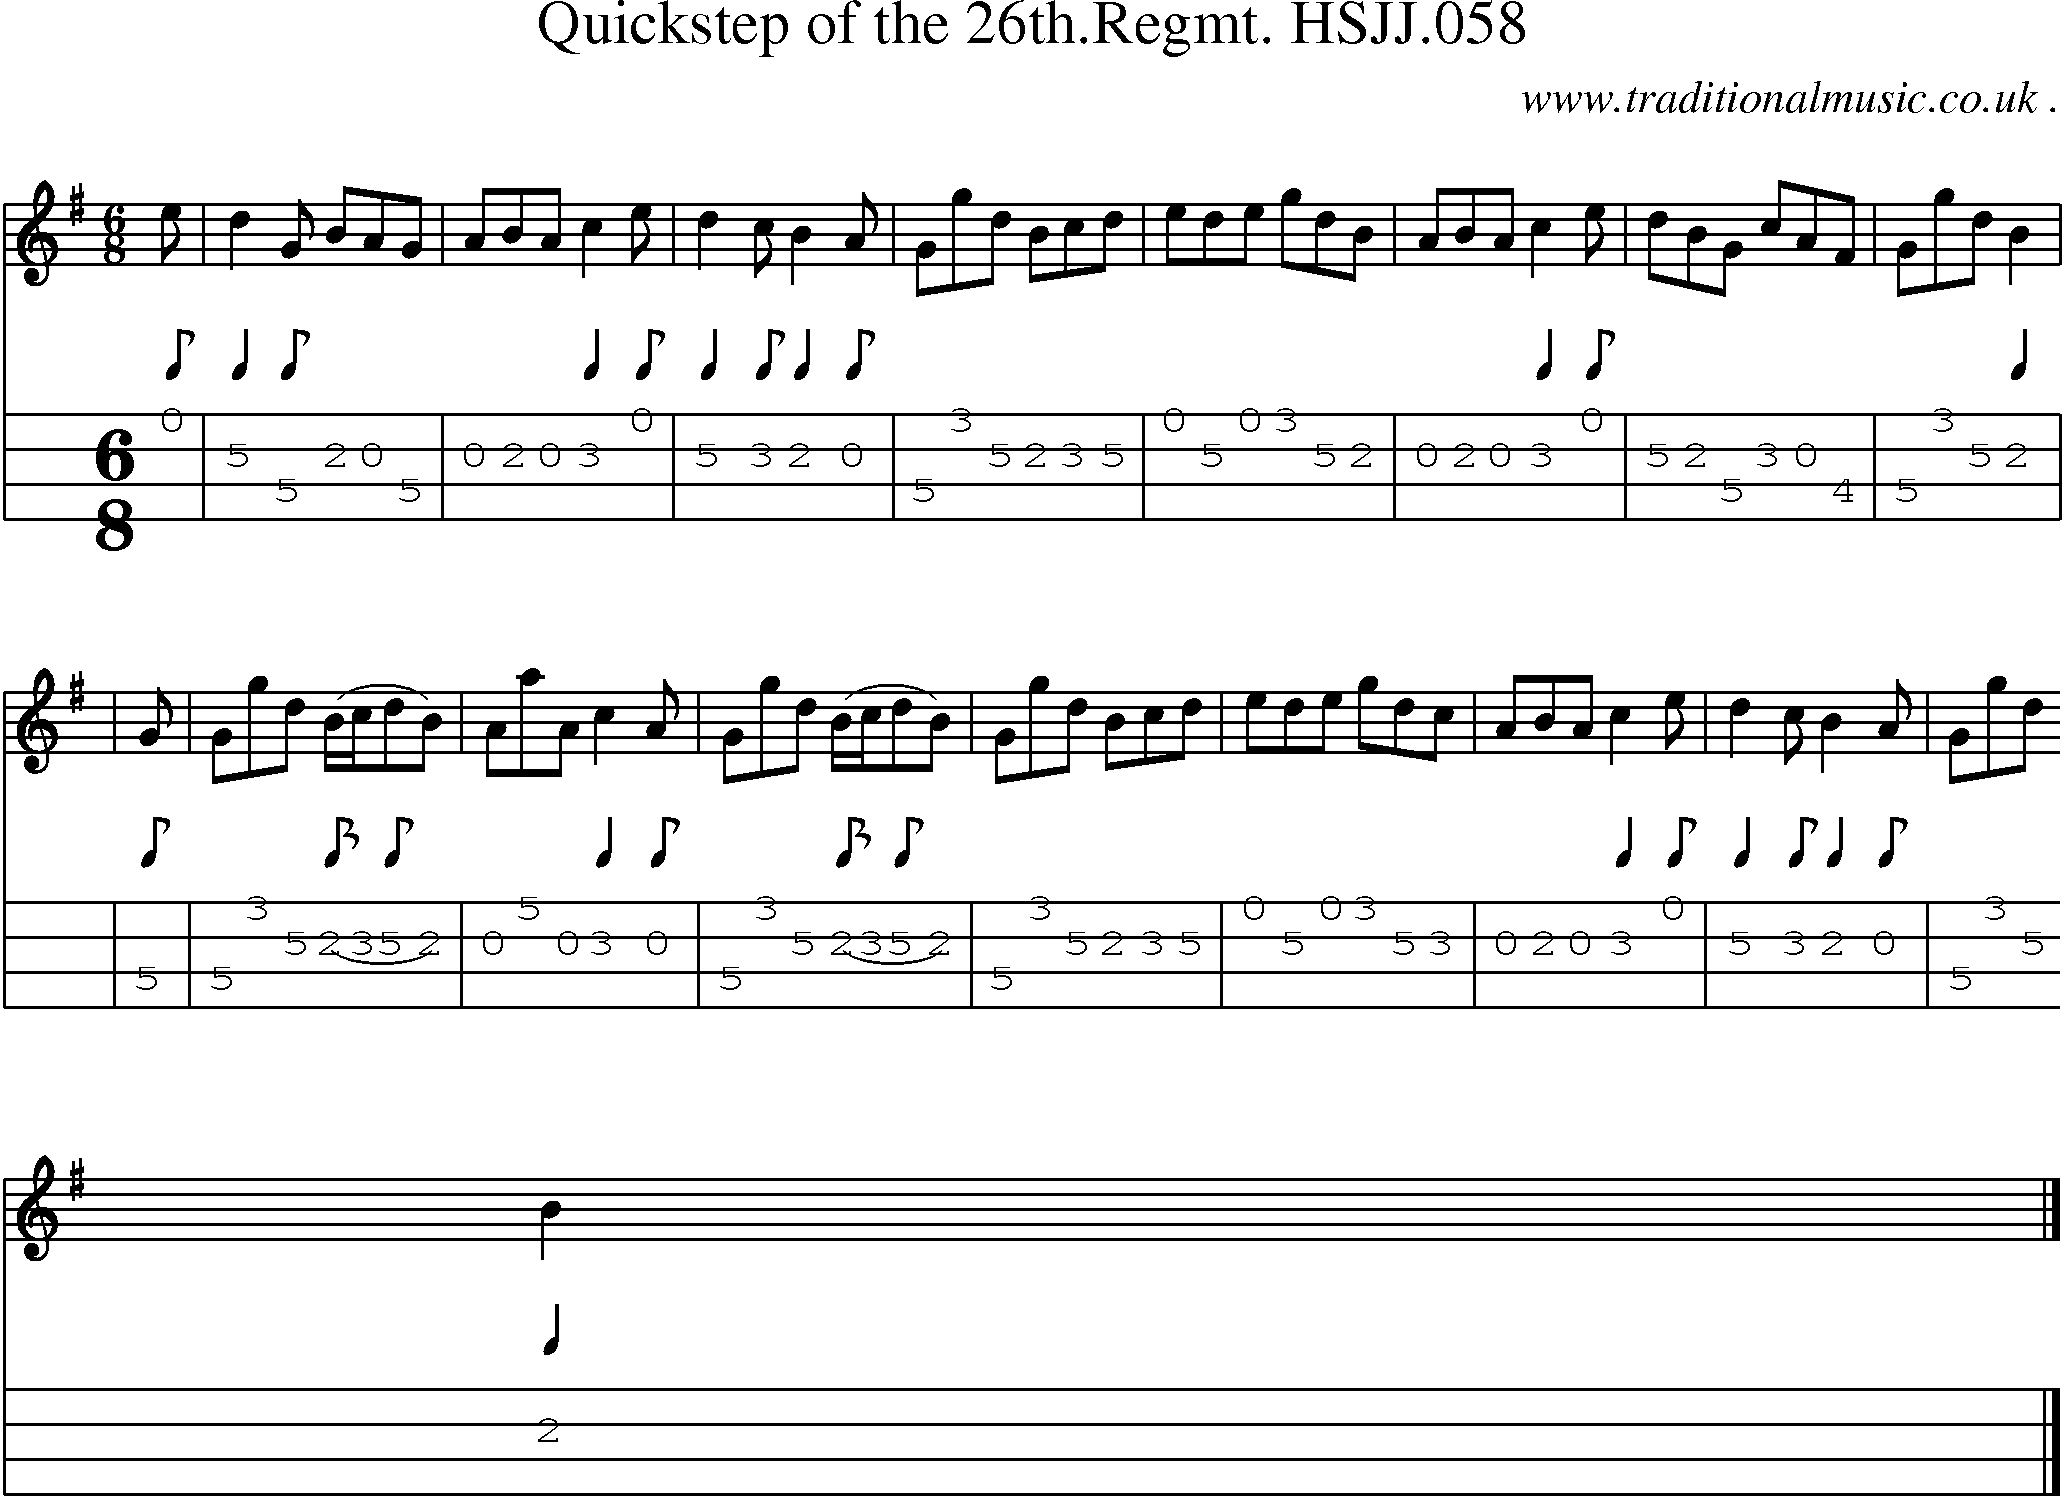 Sheet-music  score, Chords and Mandolin Tabs for Quickstep Of The 26thregmt Hsjj058